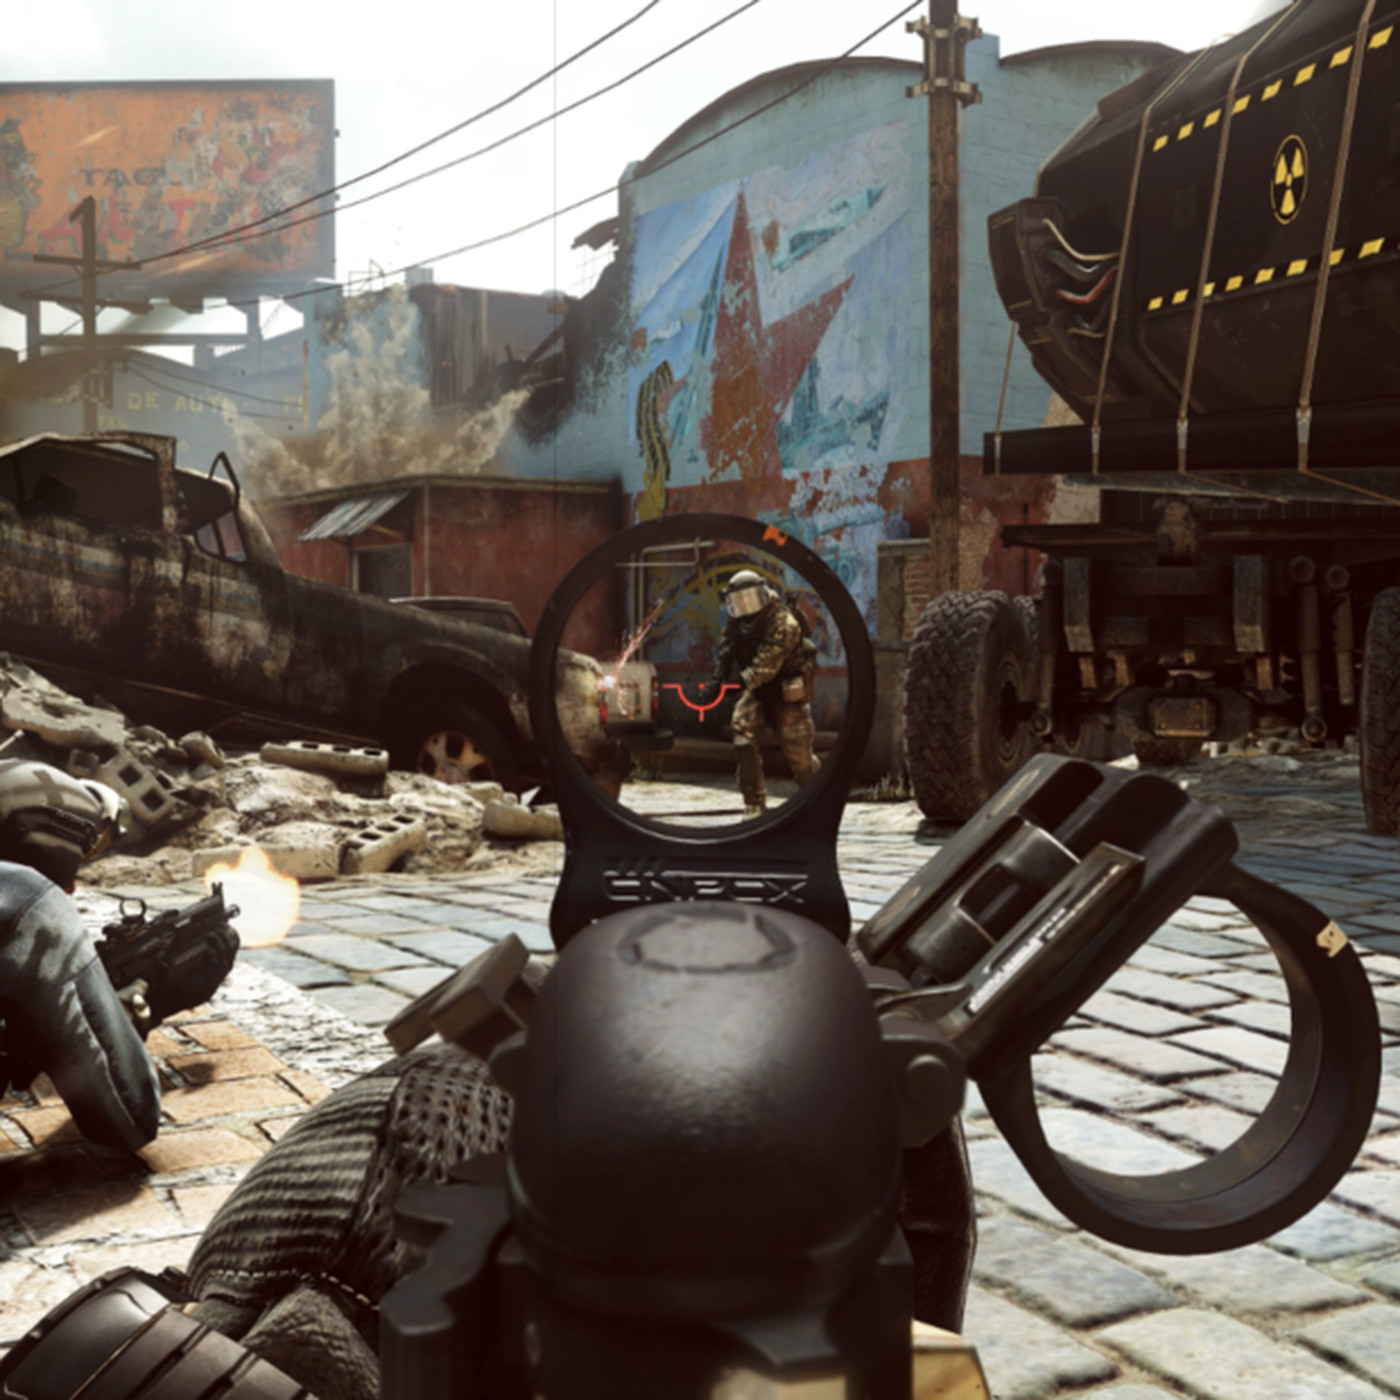 Flipper Leidinggevende soort Call of Duty: Ghosts free PS3, PS4 multiplayer demo available this weekend  - Polygon